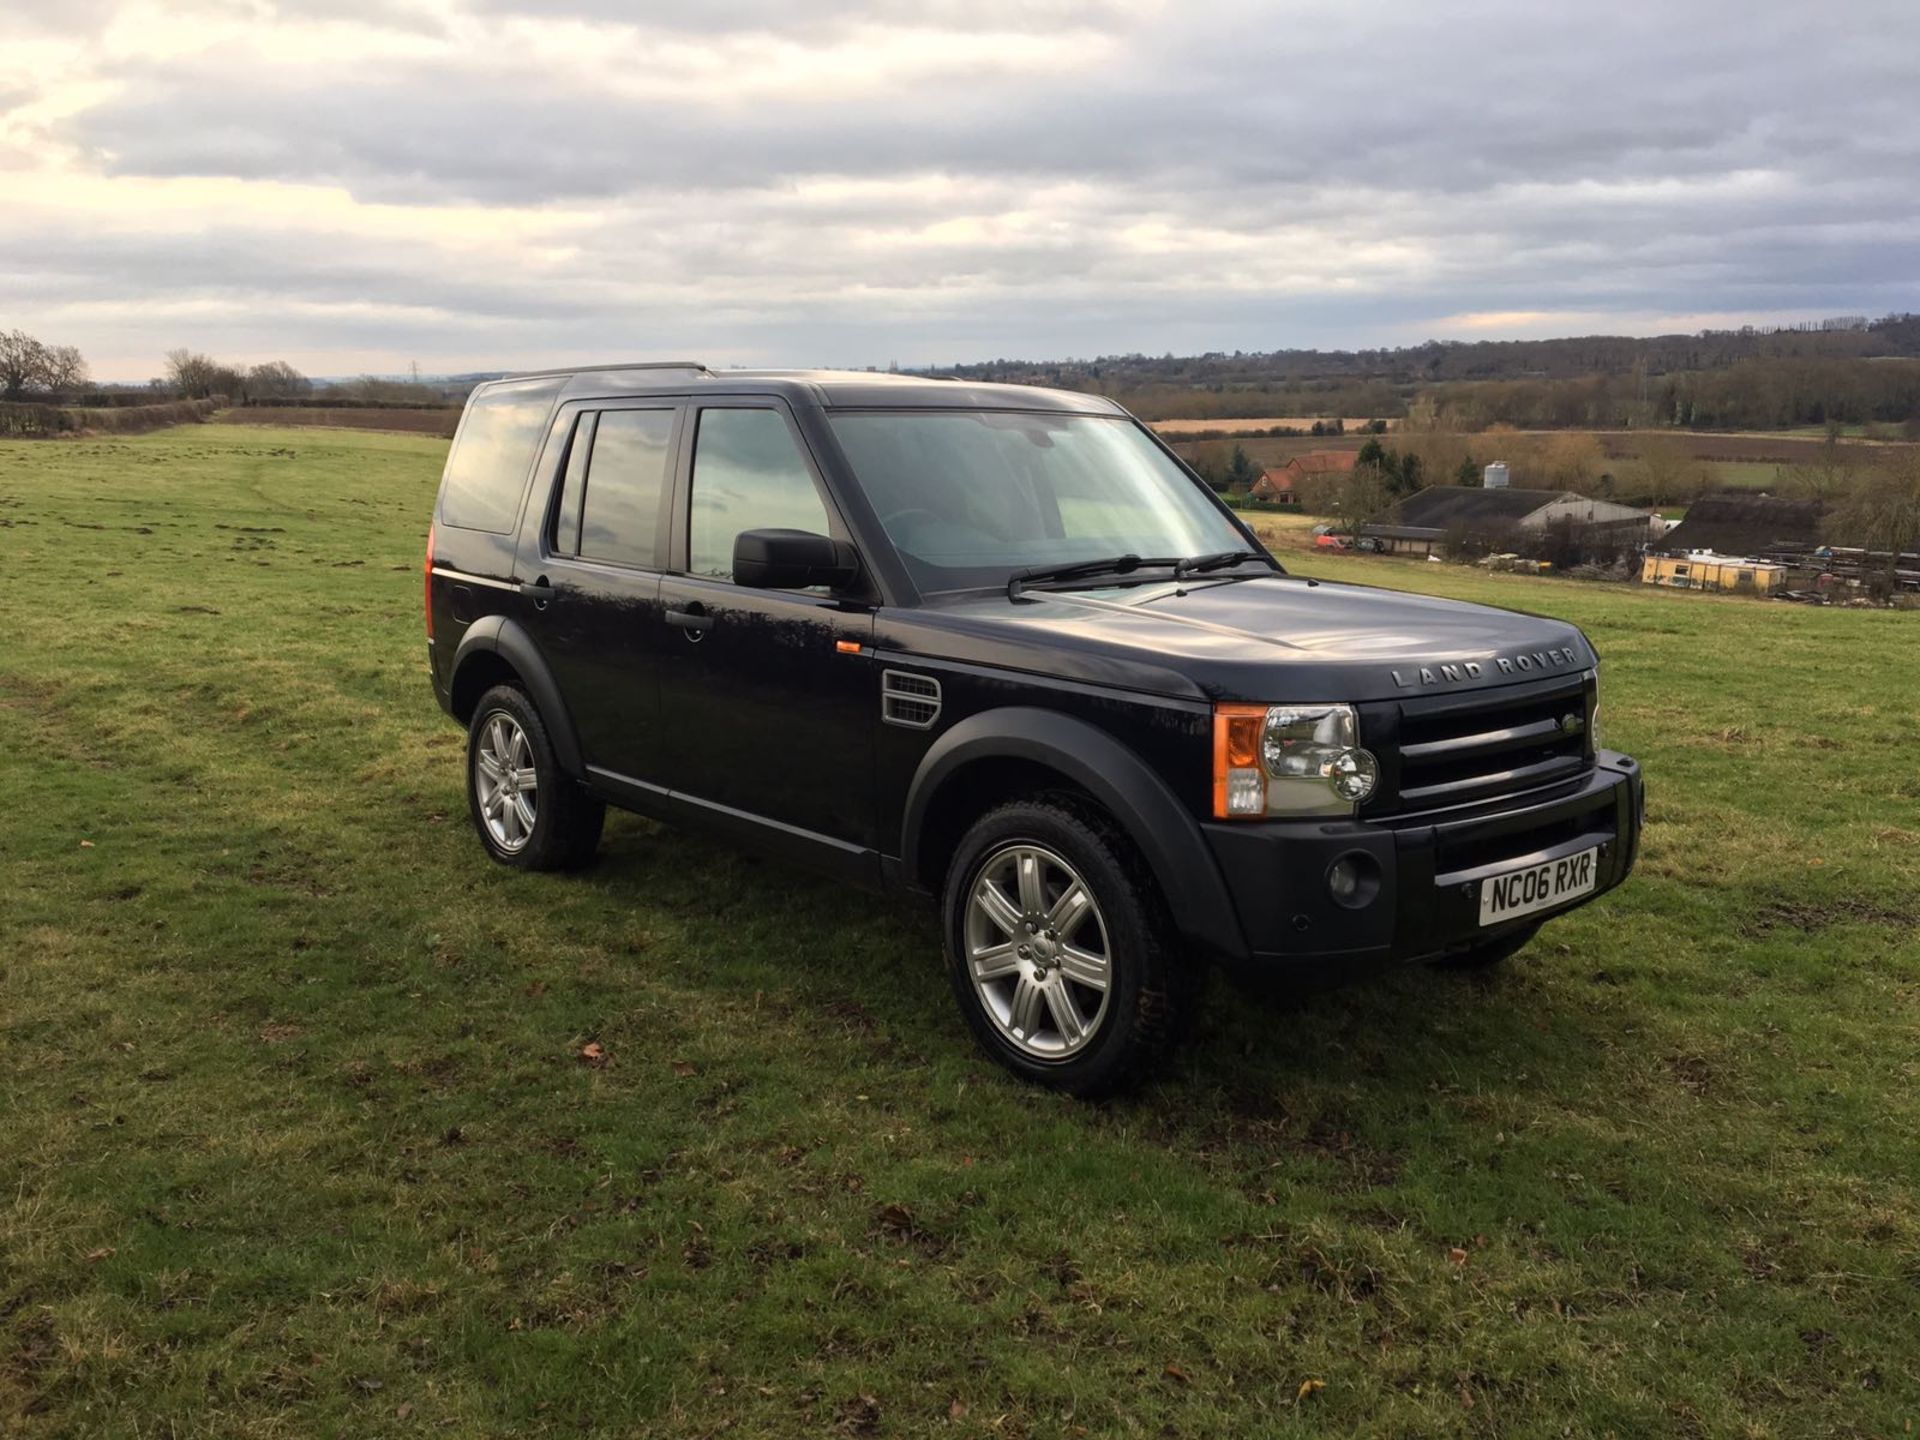 2006/06 REG LAND ROVER DISCOVERY 3 TDV6 SE AUTOMATIC - WITH FULL SERVICE HISTORY *NO VAT*